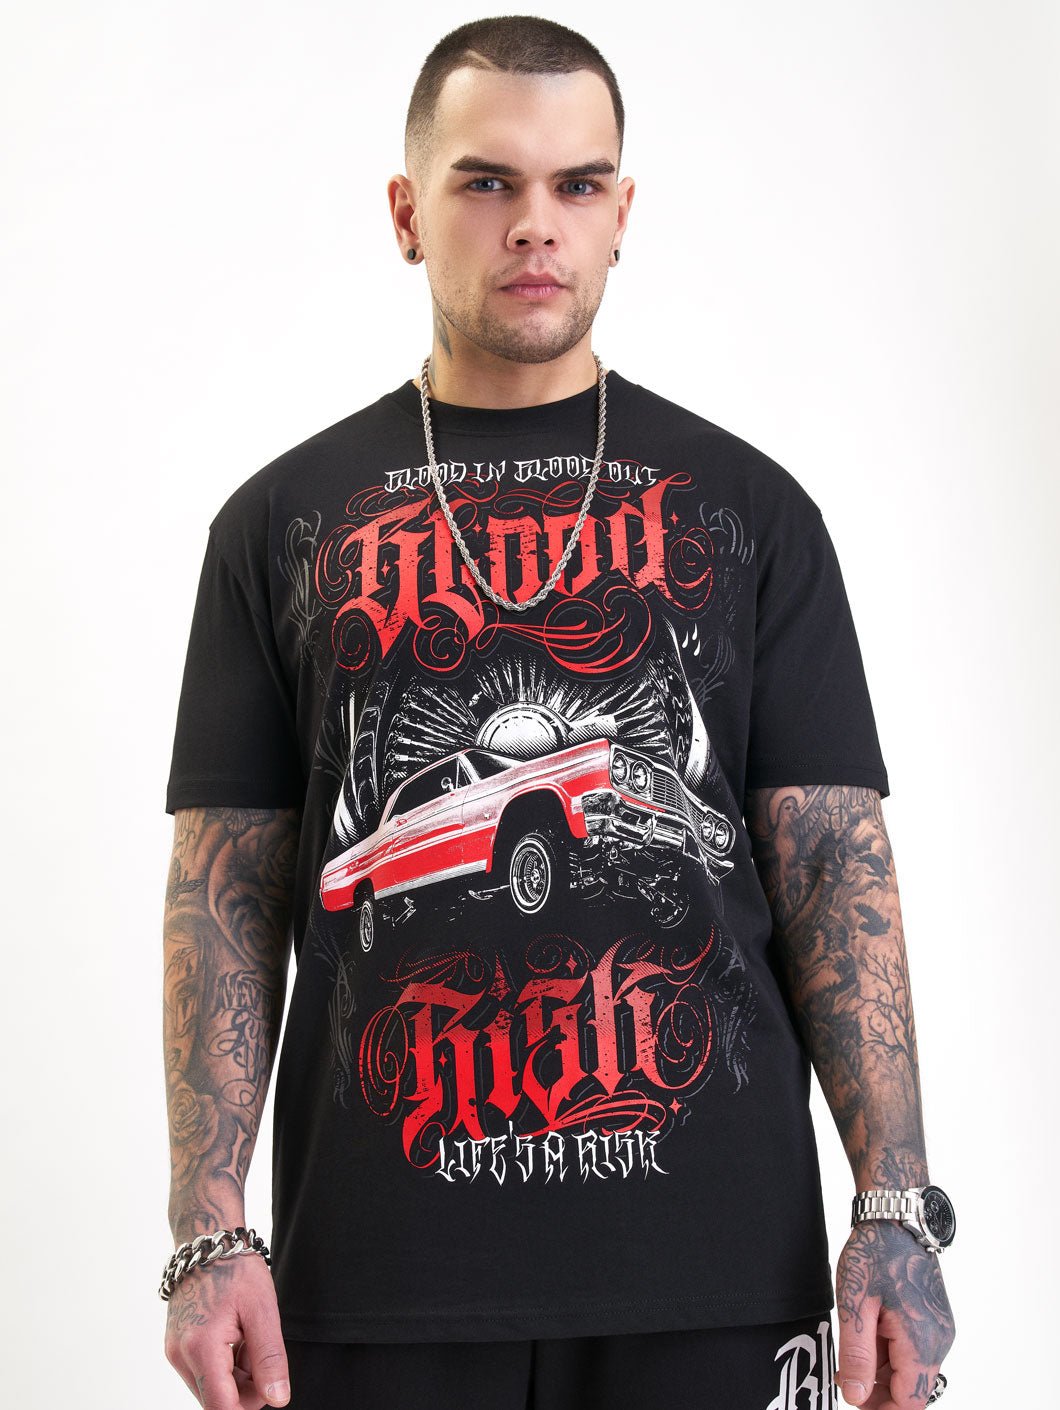 Blood In Blood Out Tavos T-Shirt Black